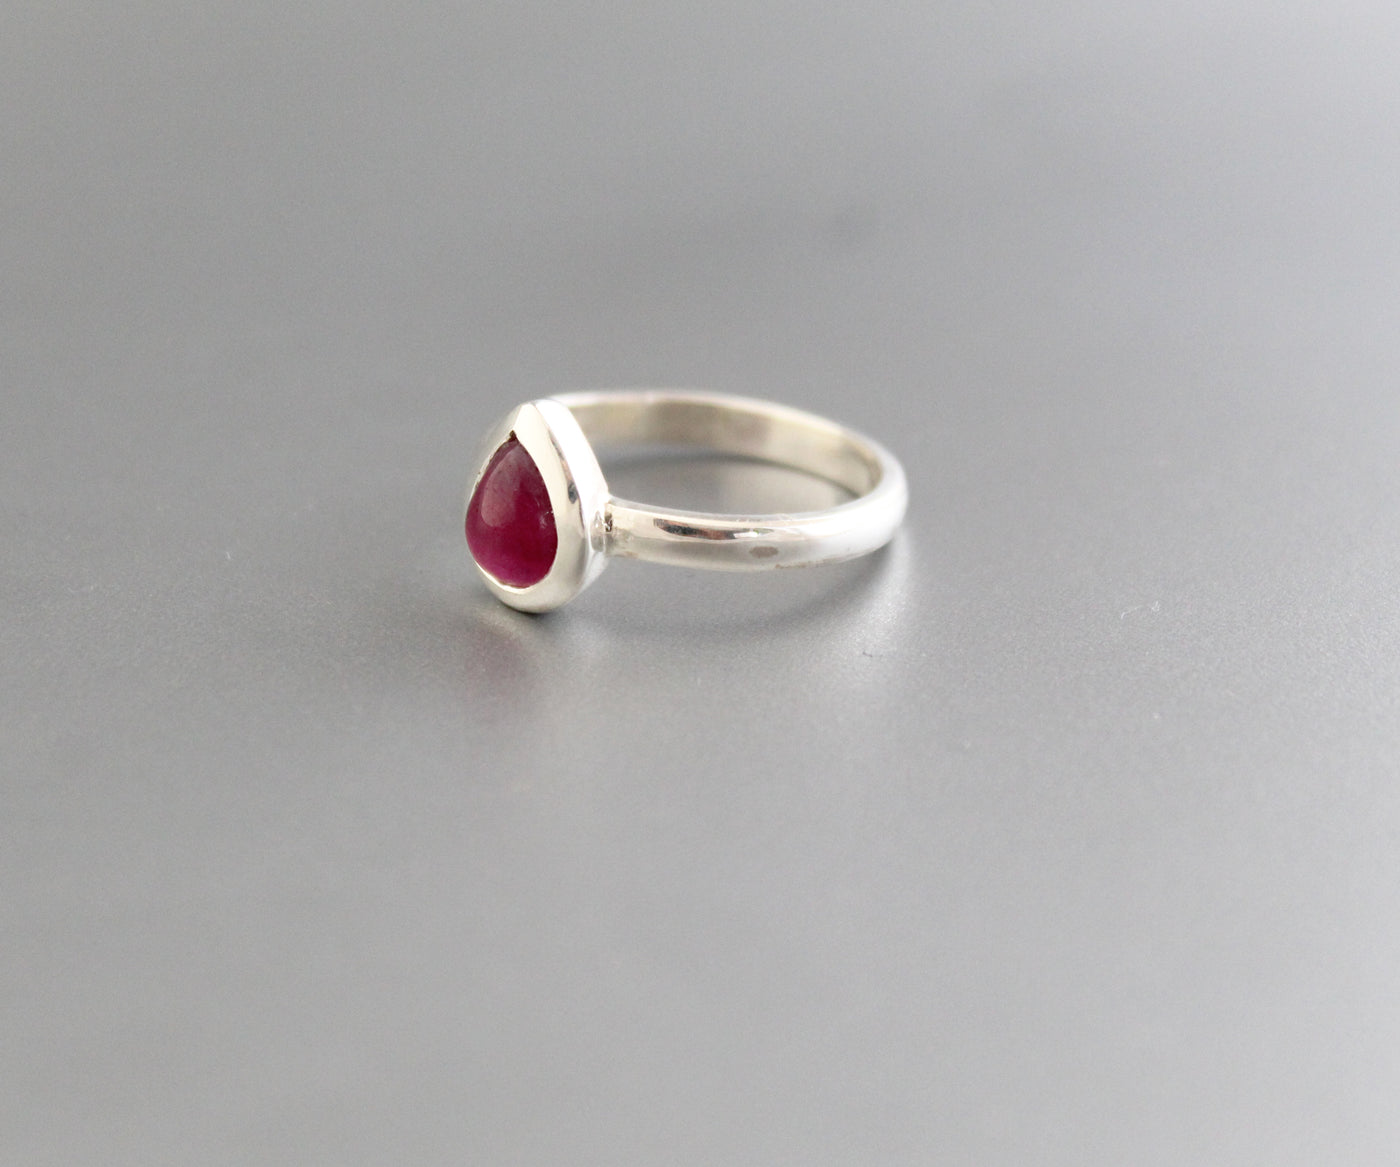 Pear Ruby Ring, Unique Engagement Ring, Solitaire Ring, Teardrop Ring, Natural Ruby, Beautiful Ring, Engagement Ring, Wedding Gifts, Organic